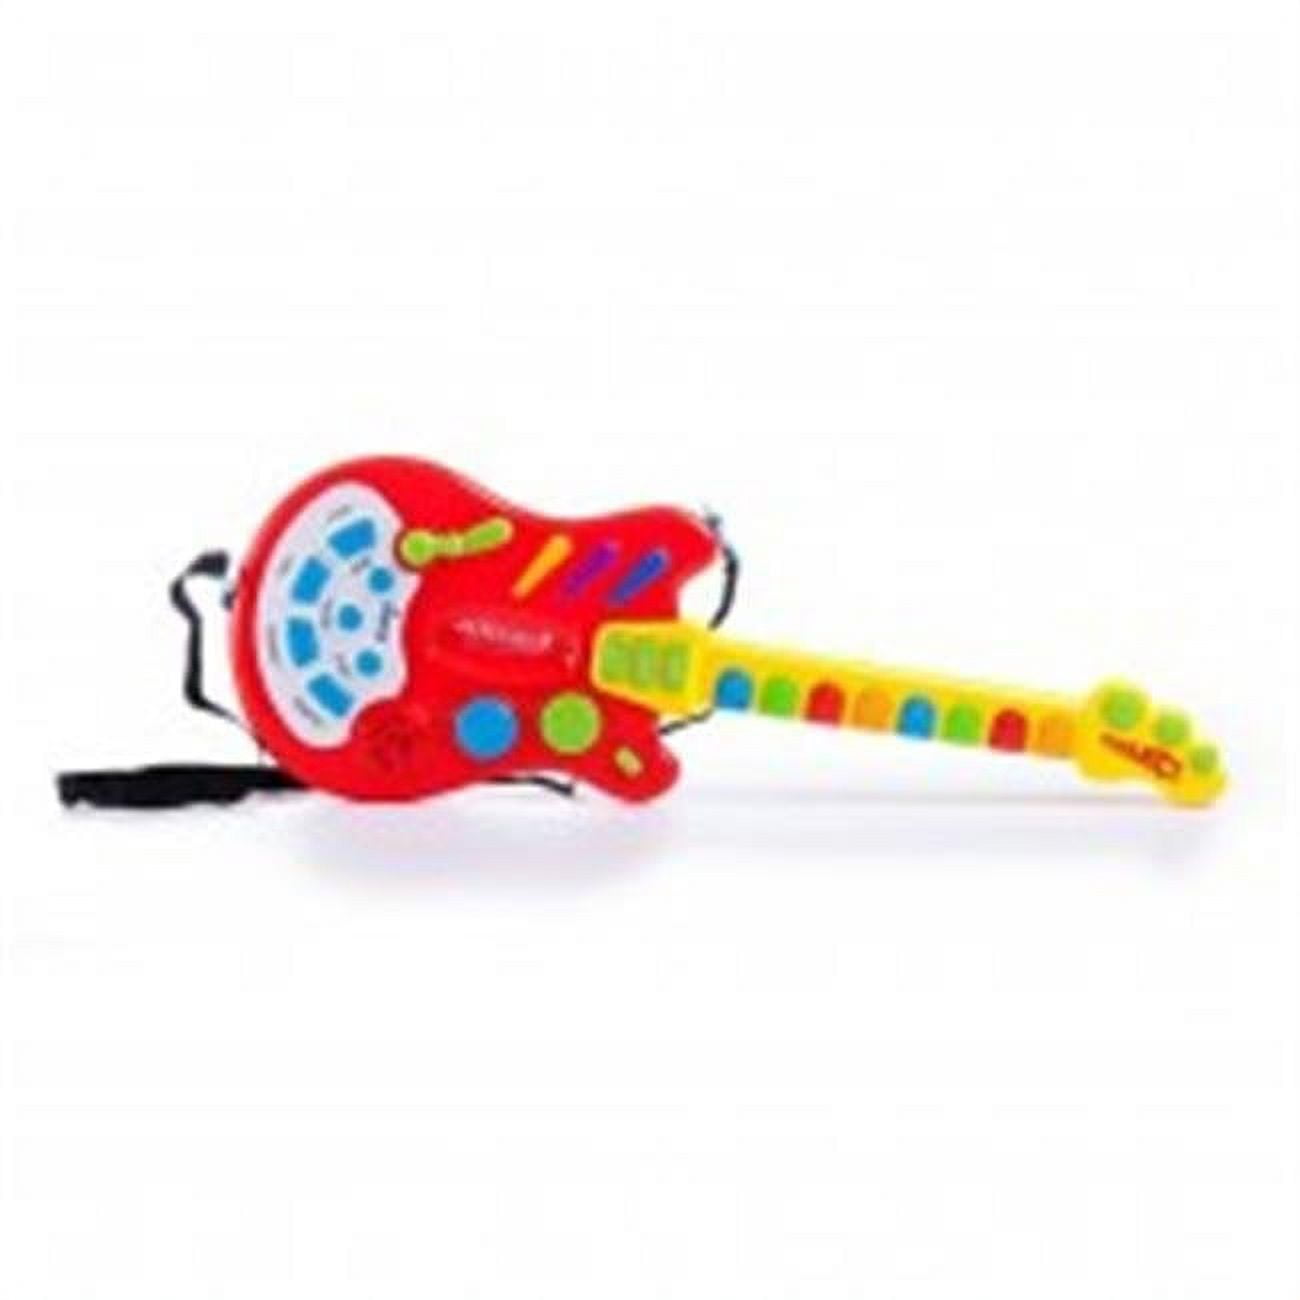 Ps18a Electric Guitar Toy With Sound & Lights